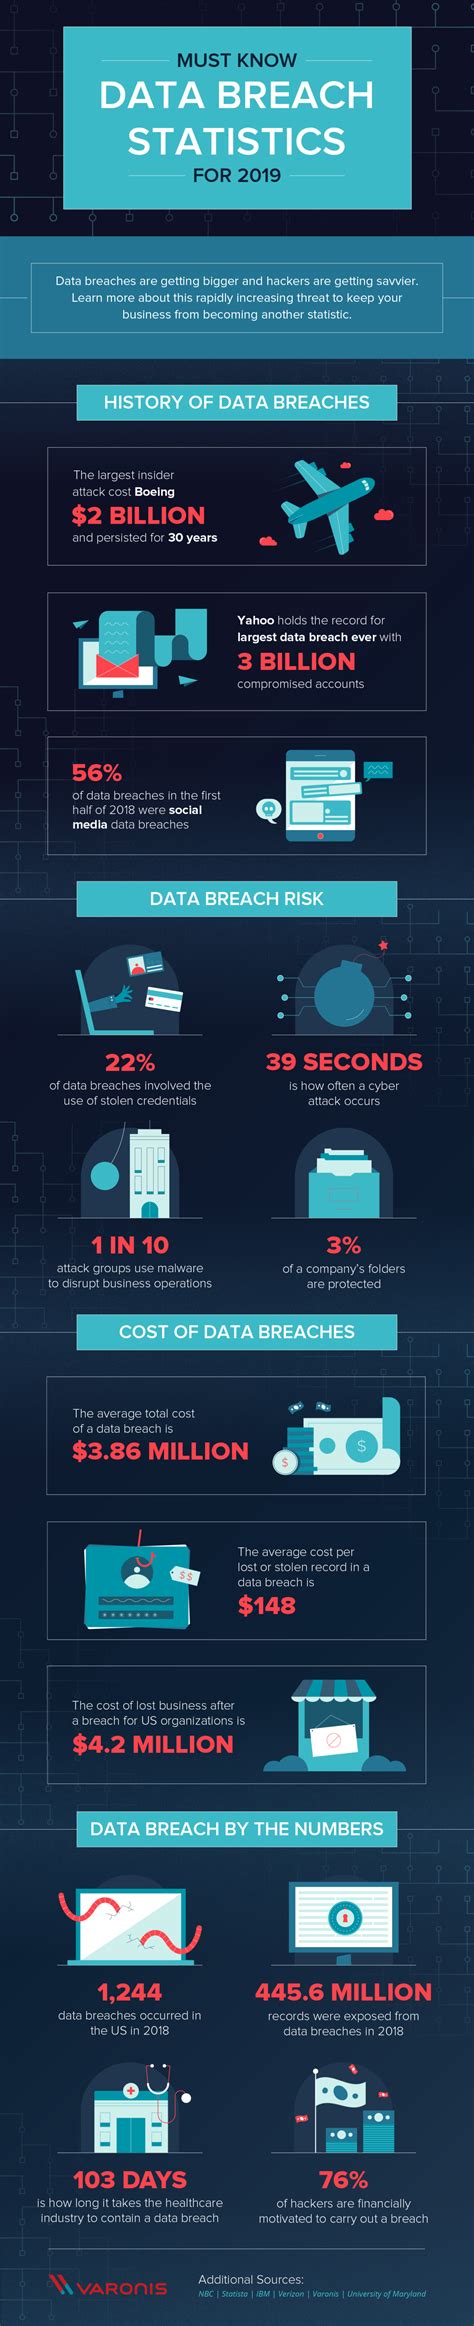 56 Must Know Data Breach Statistics For 2019 Infographic Visualistan